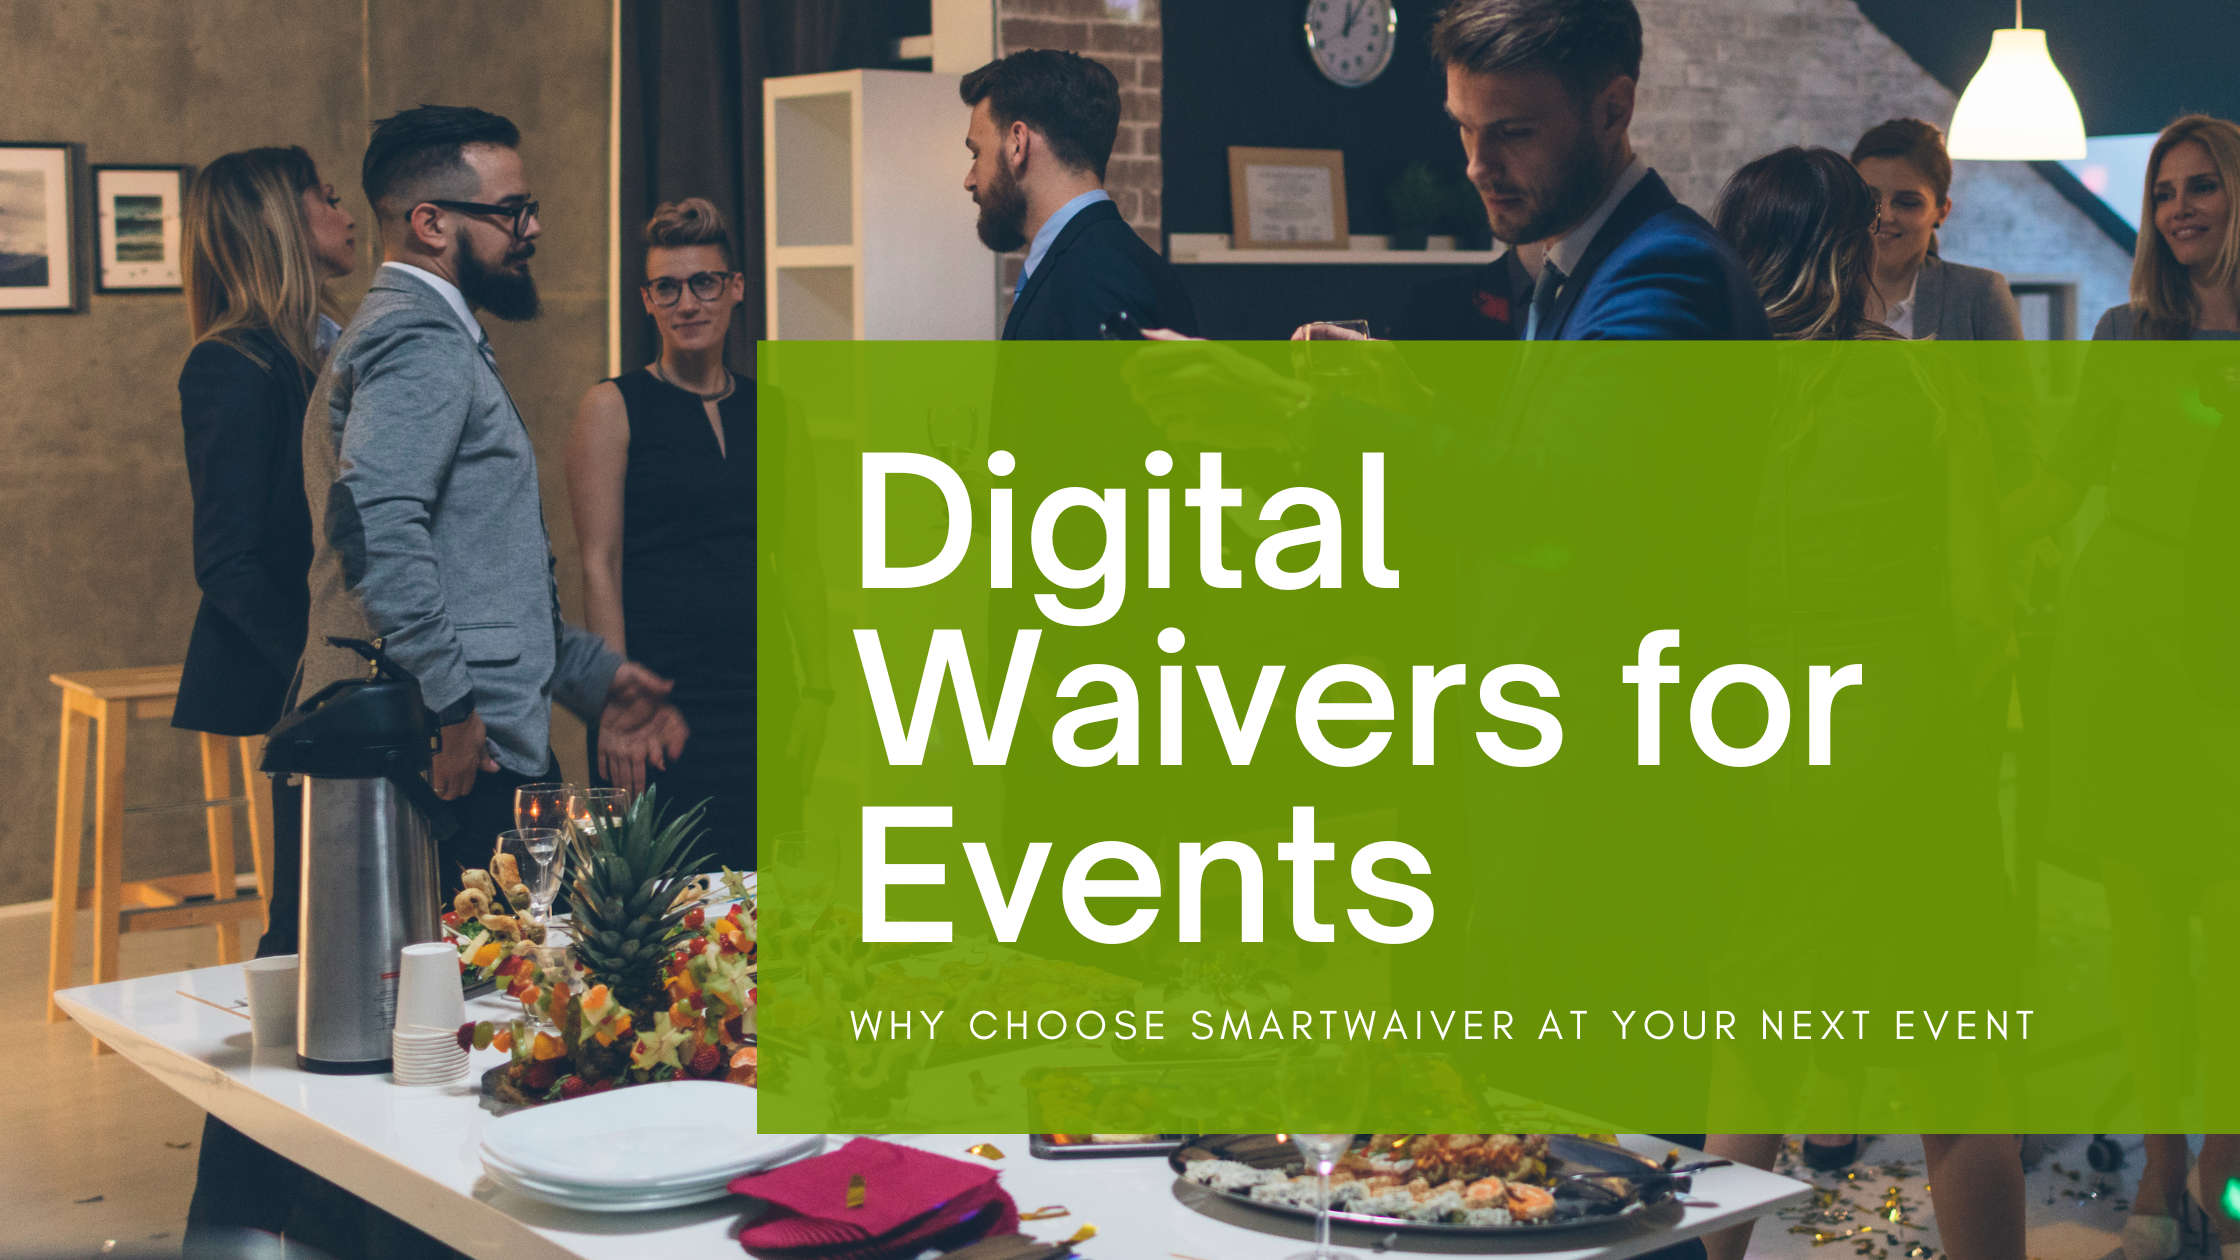 Digital Waivers for Events